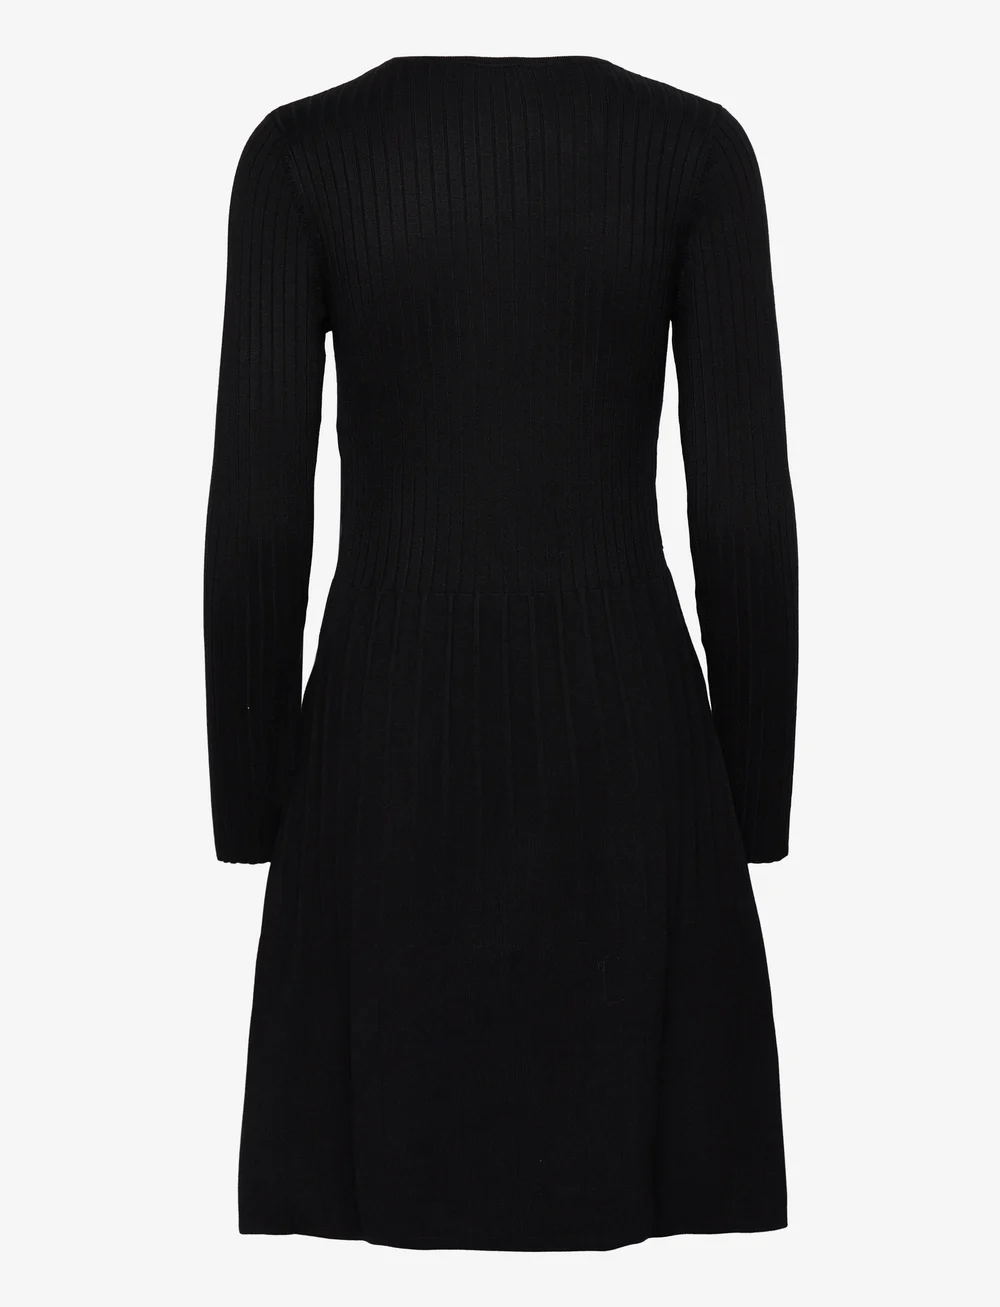 Esprit Casual Women Dresses Flat Knitted Kneelength - Knitted dresses